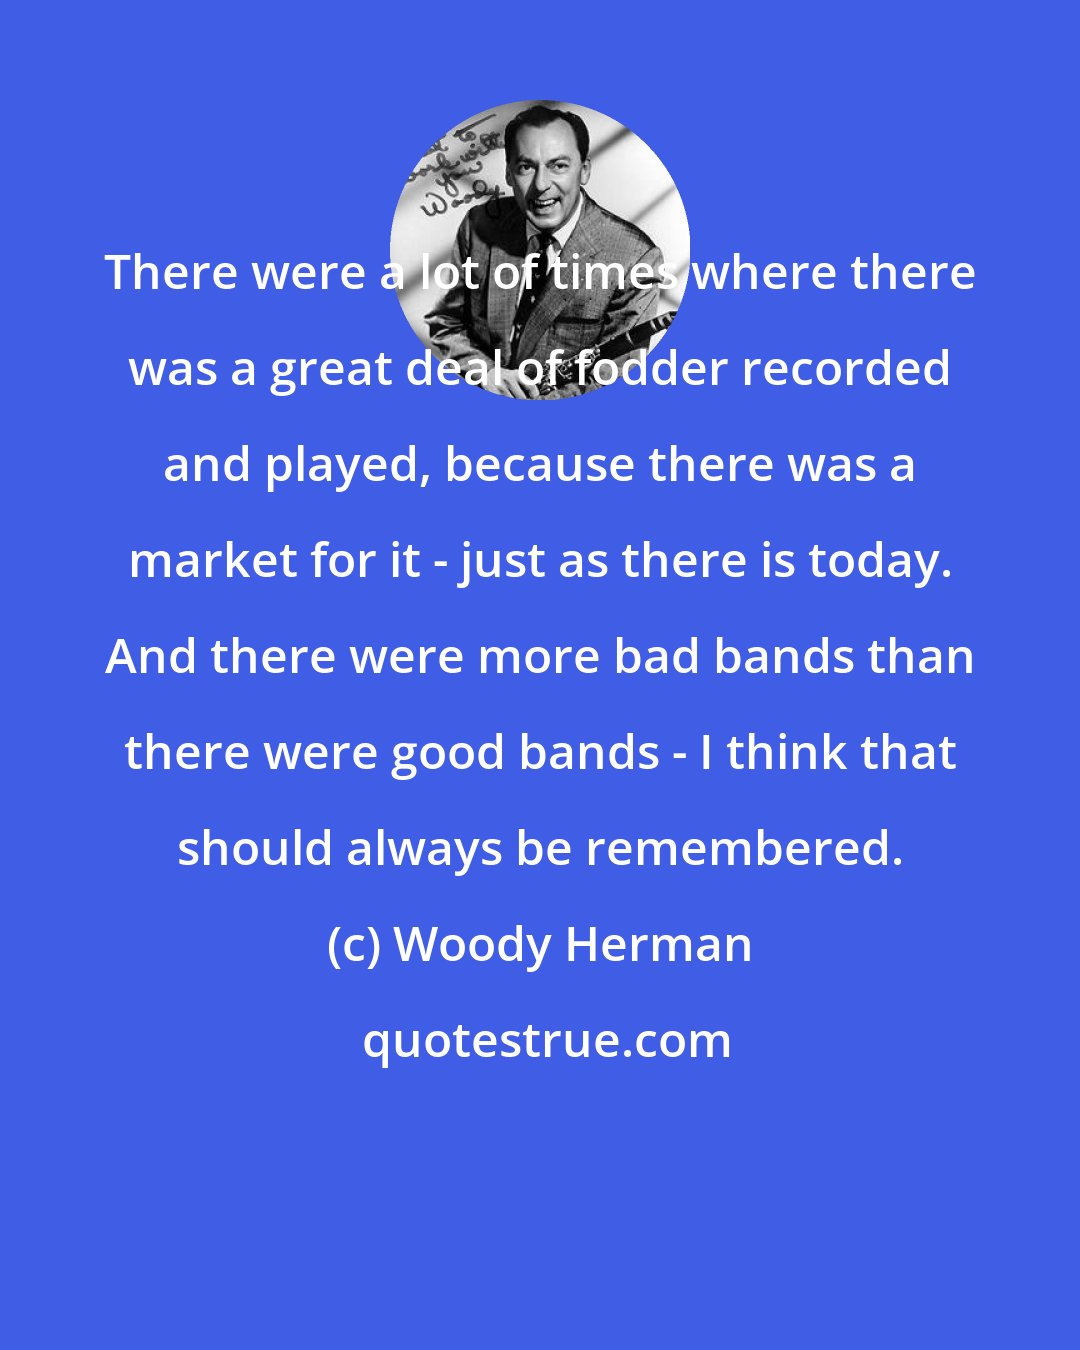 Woody Herman: There were a lot of times where there was a great deal of fodder recorded and played, because there was a market for it - just as there is today. And there were more bad bands than there were good bands - I think that should always be remembered.